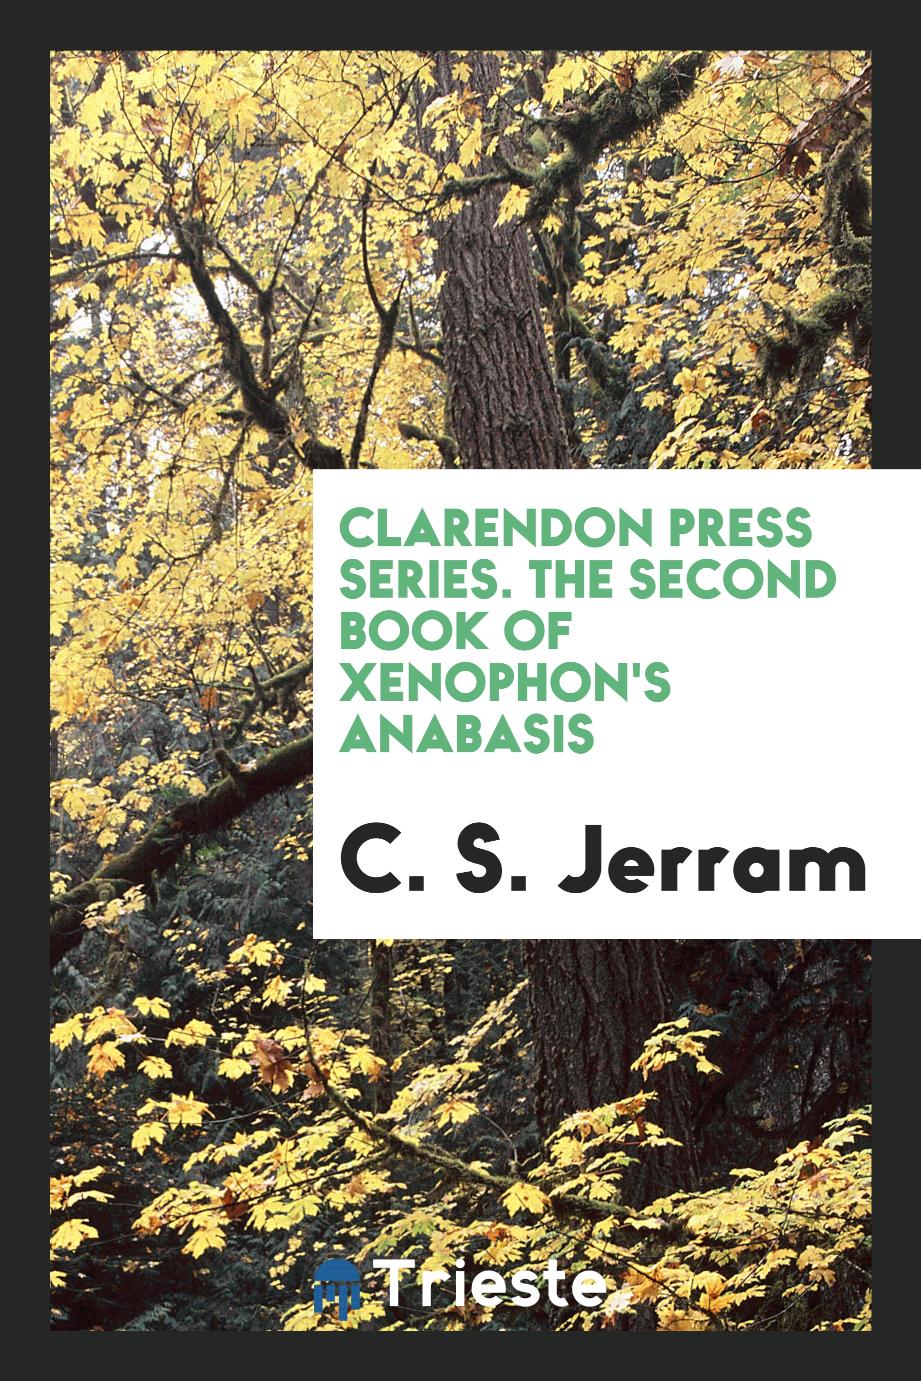 Clarendon Press Series. The Second Book of Xenophon's Anabasis